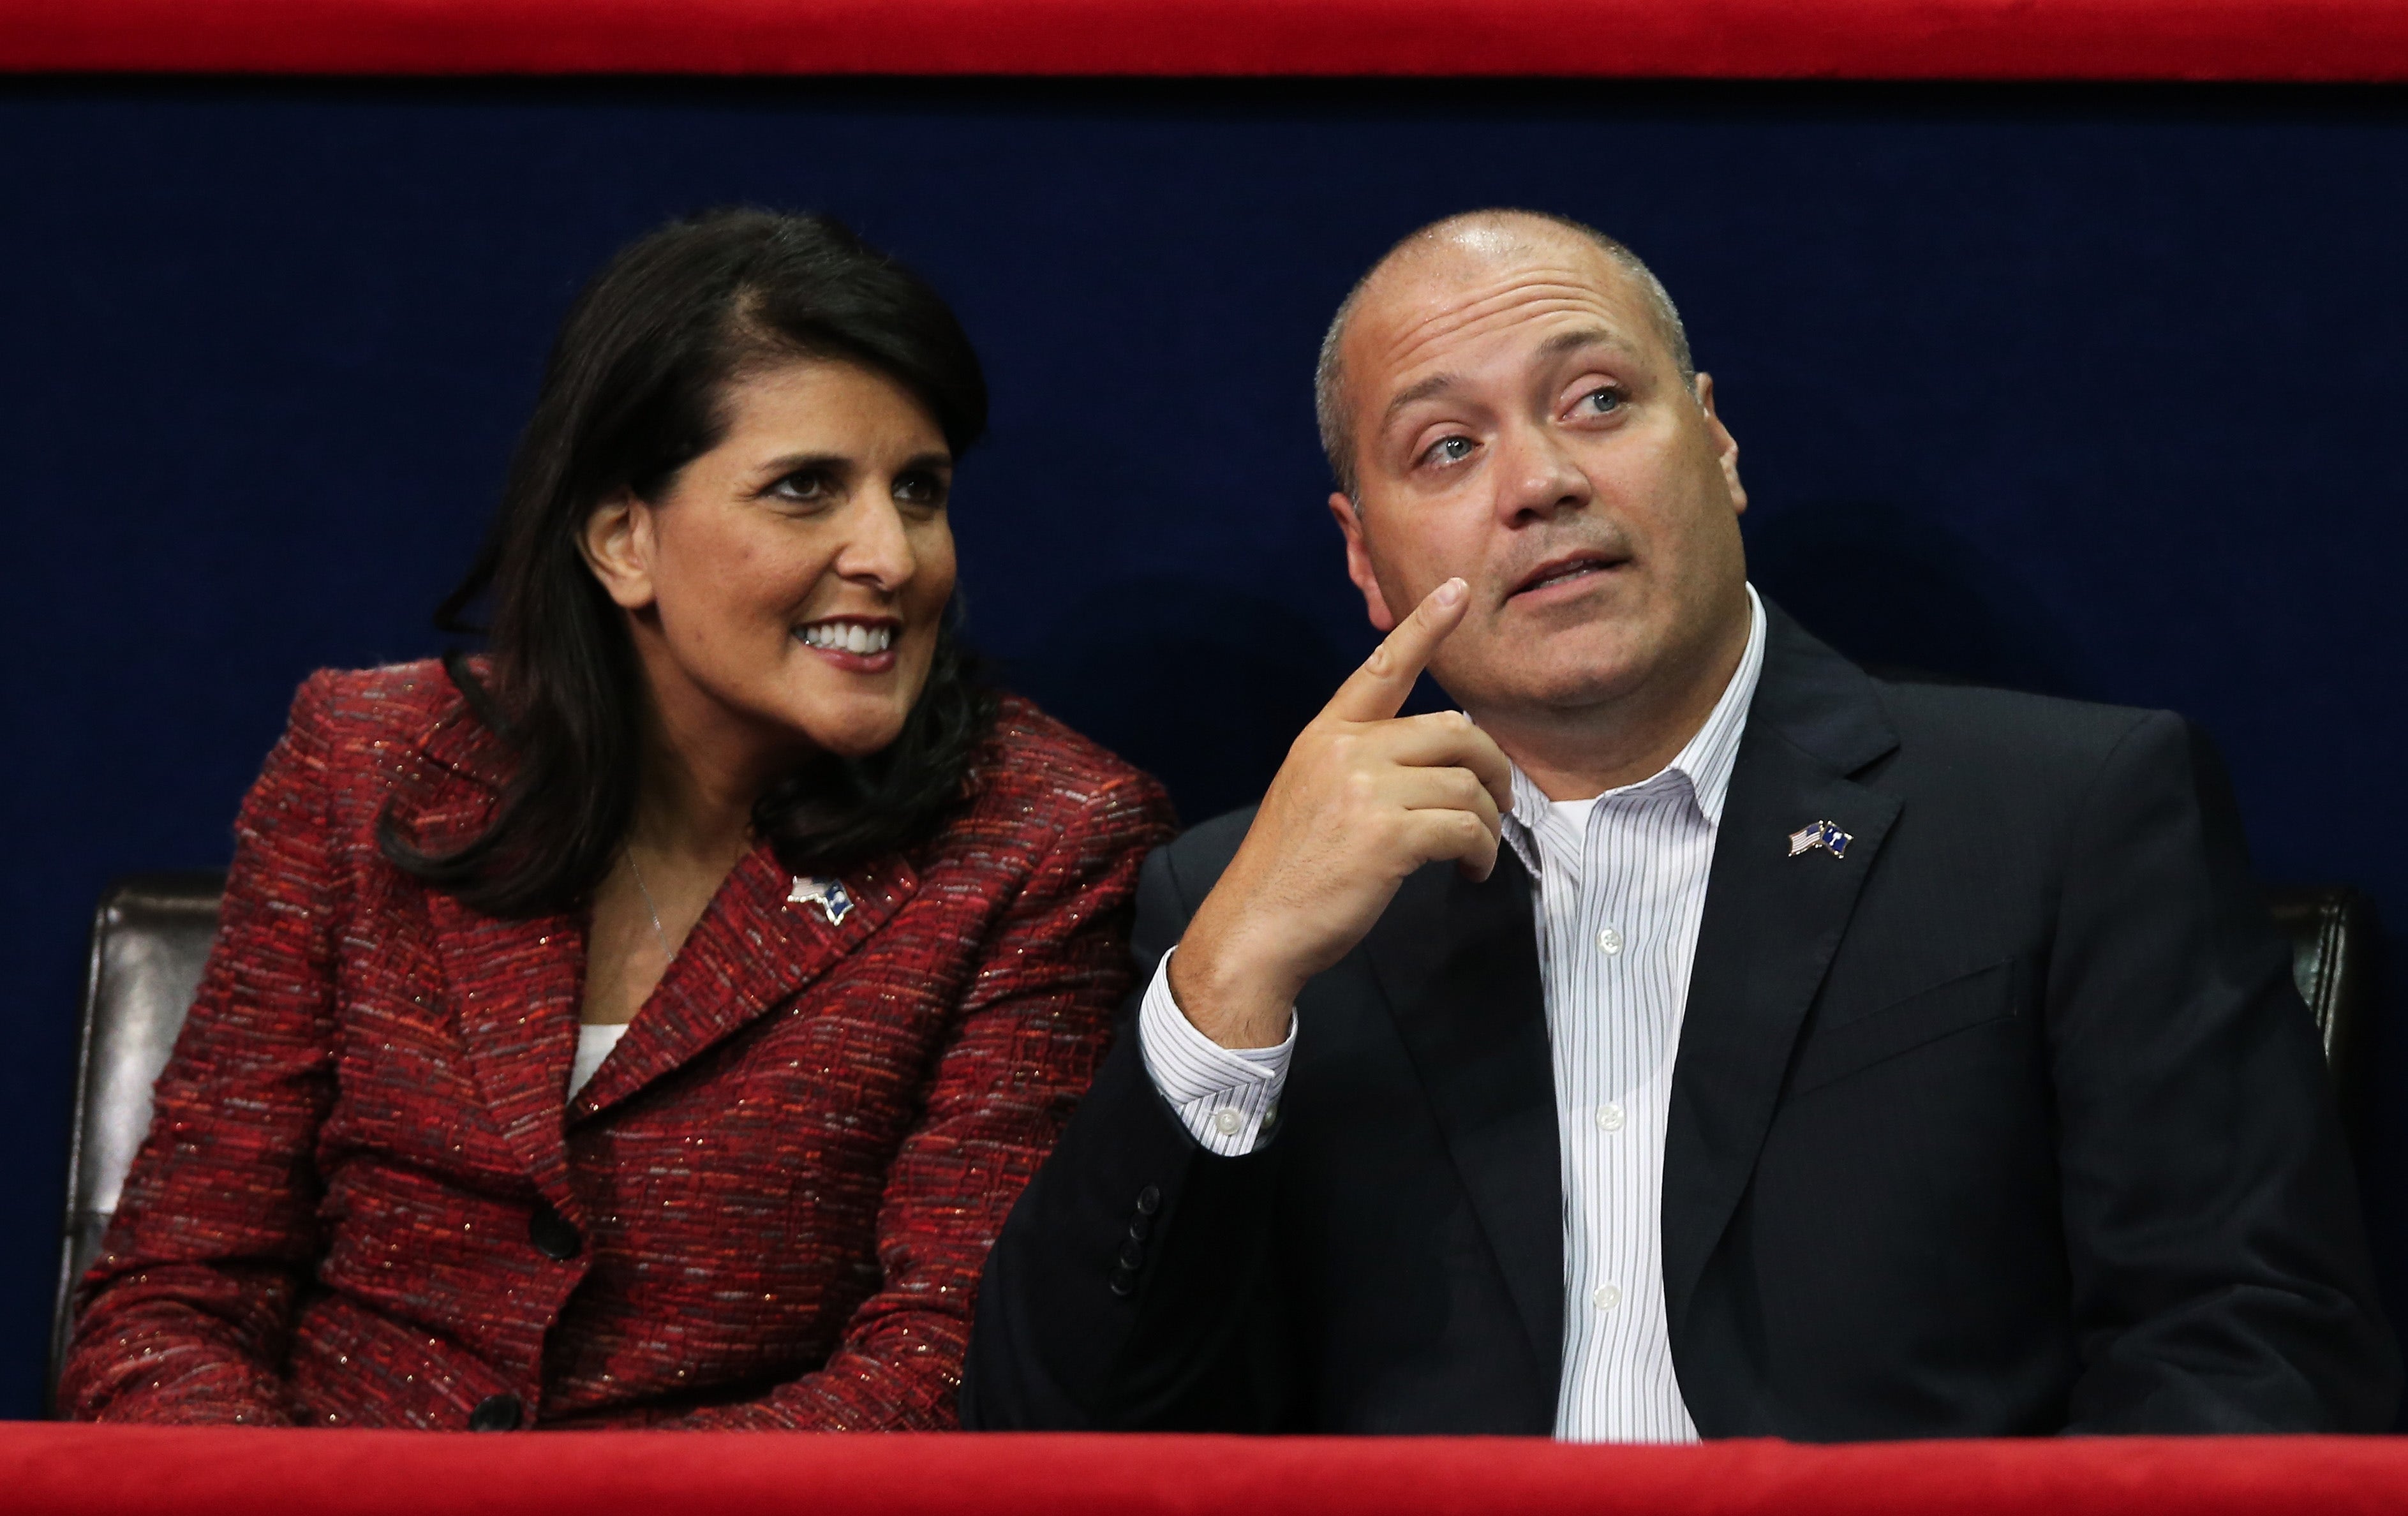 Nikki Haley’s renaming of her husband resurfaces amid Republican primary